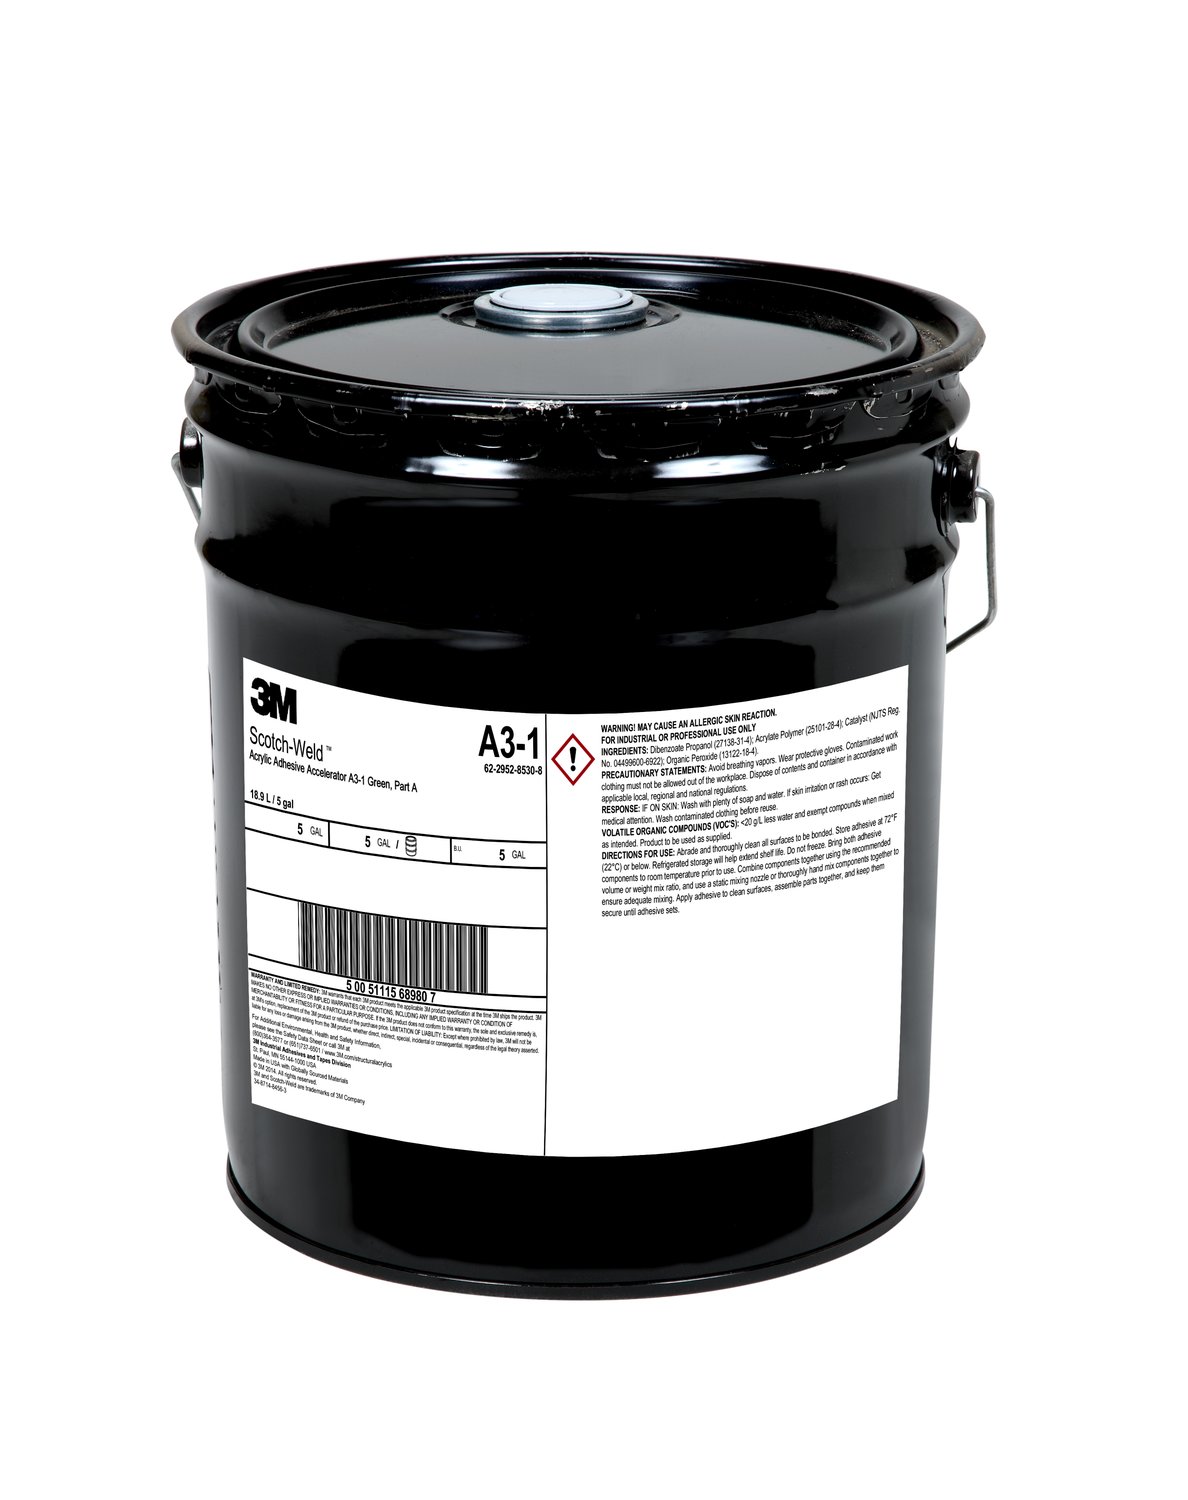 7100010882 - 3M Scotch-Weld Acrylic Adhesive Accelerator A3-1, Green, Part A, 5
Gallon (Pail), Drum